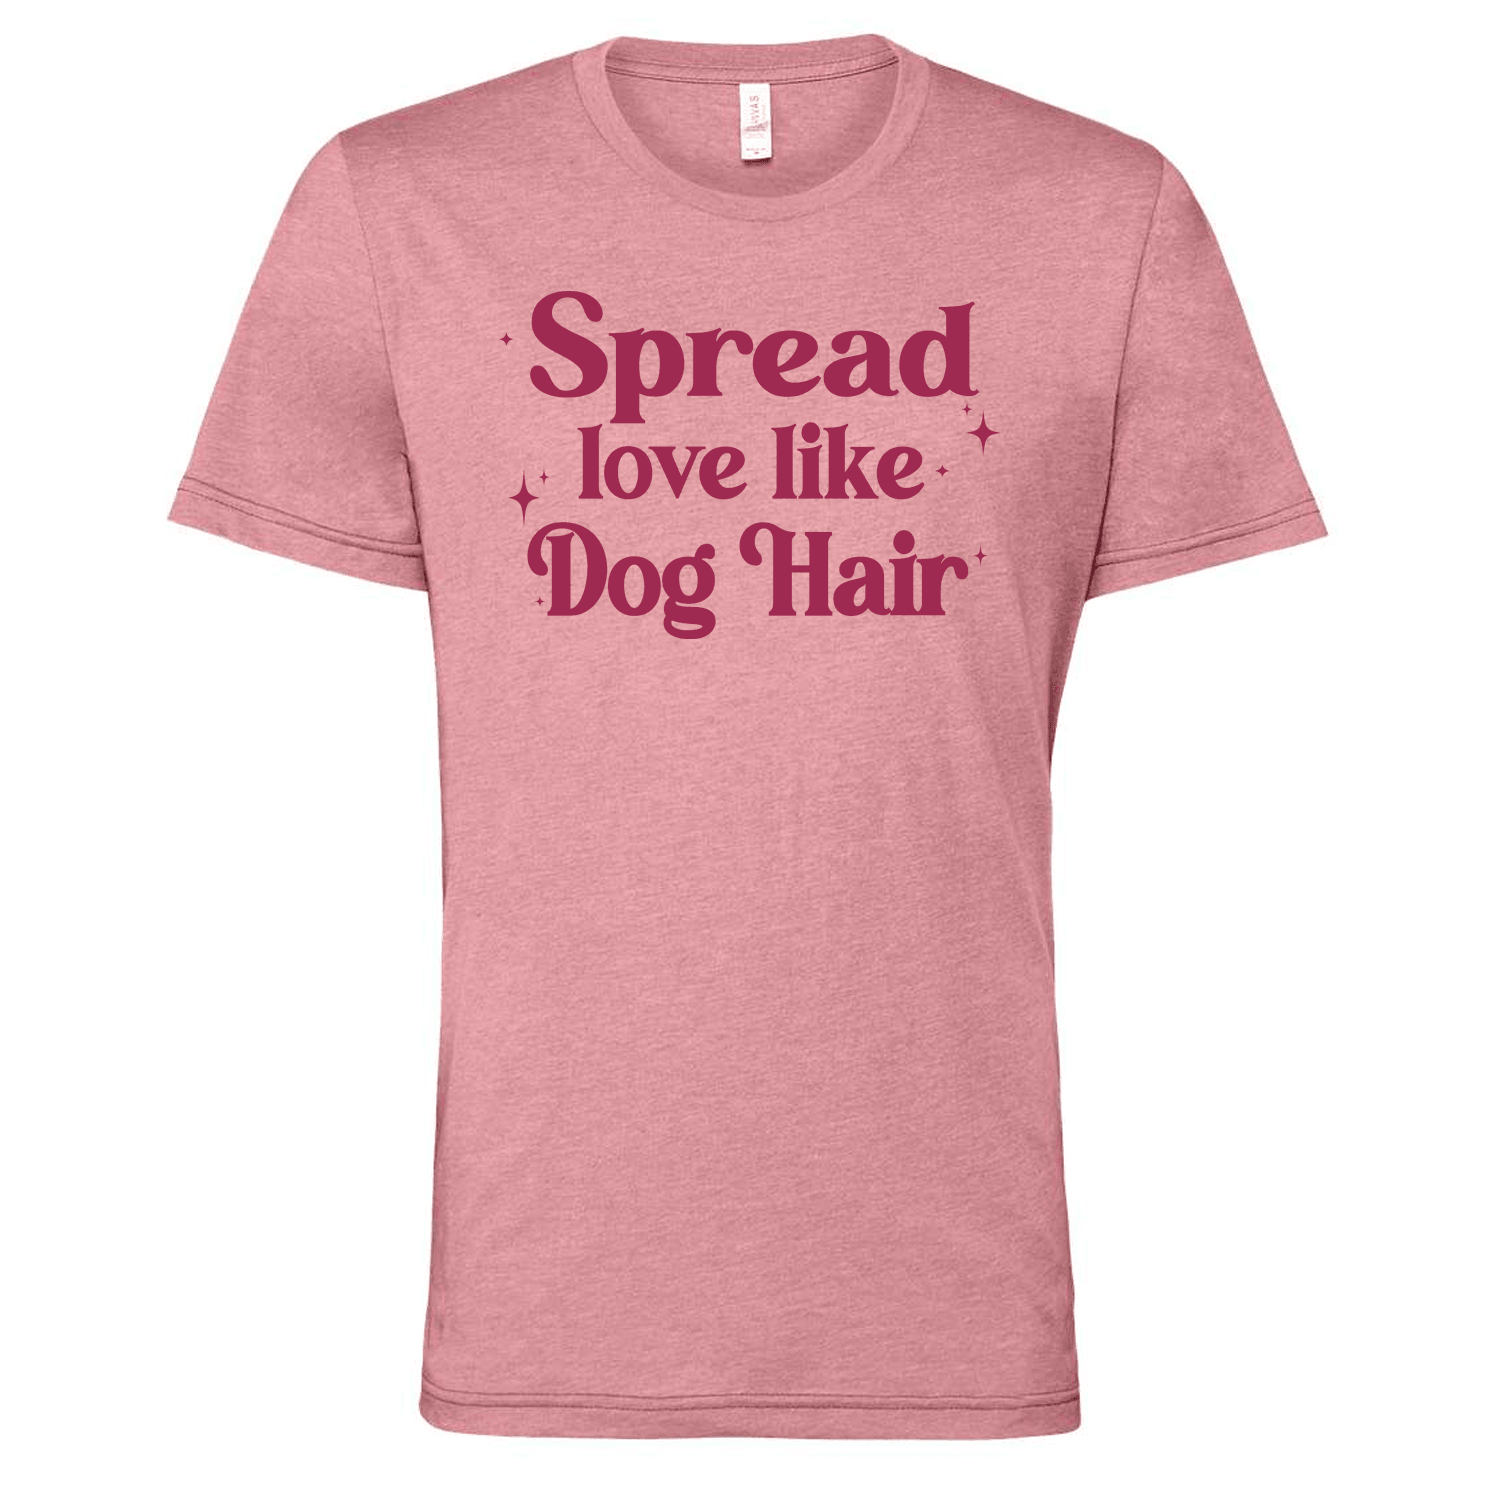 Spread Love like Dog Hair T-Shirt - Ales to Trails